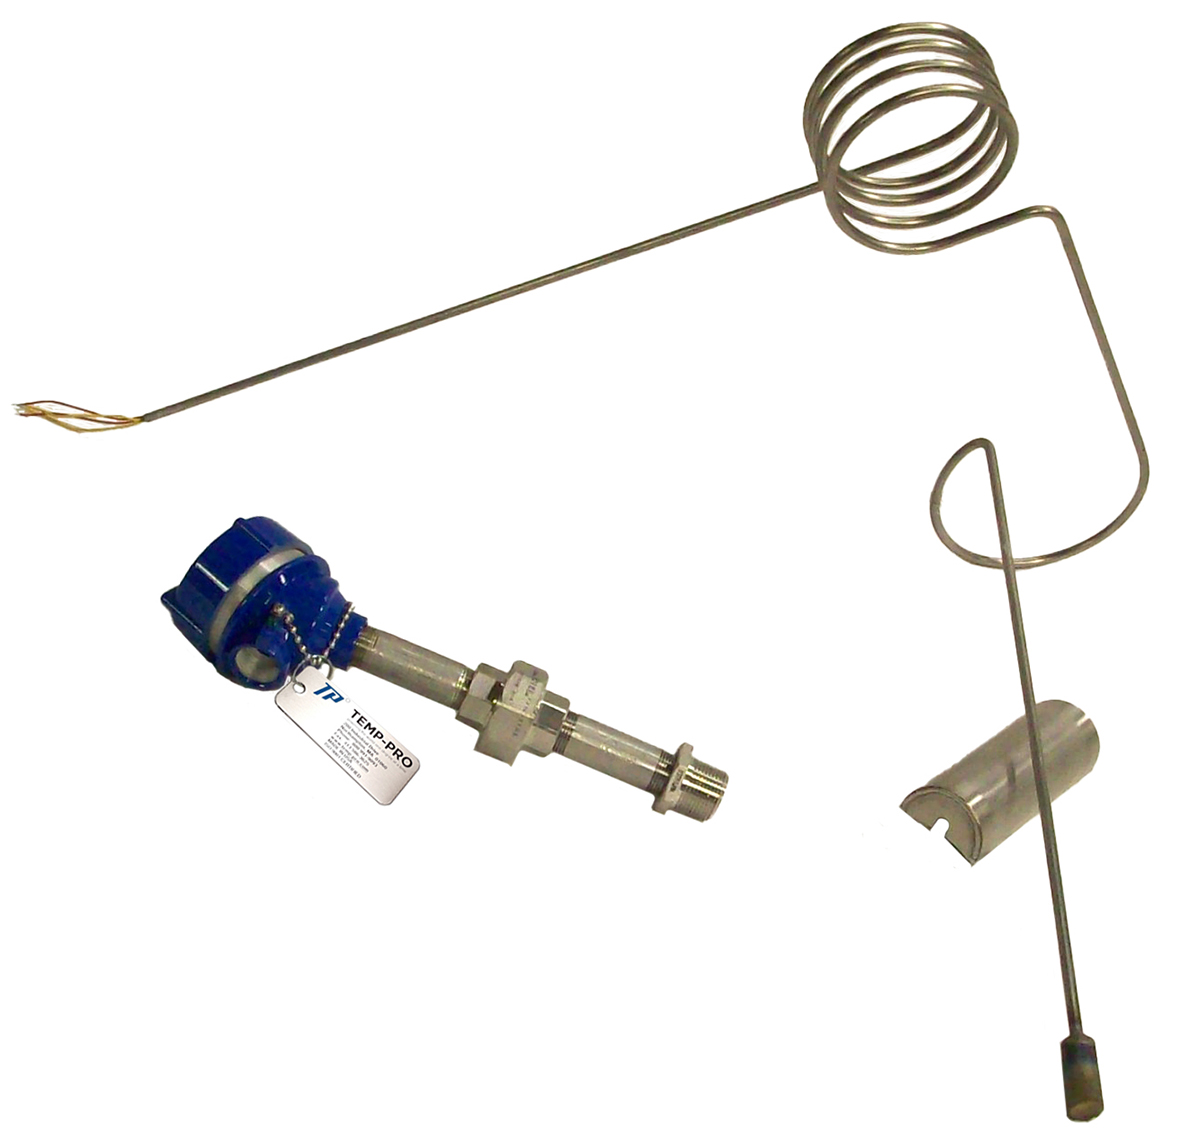 Thermocouple Working and Types - Chemical Engineering World